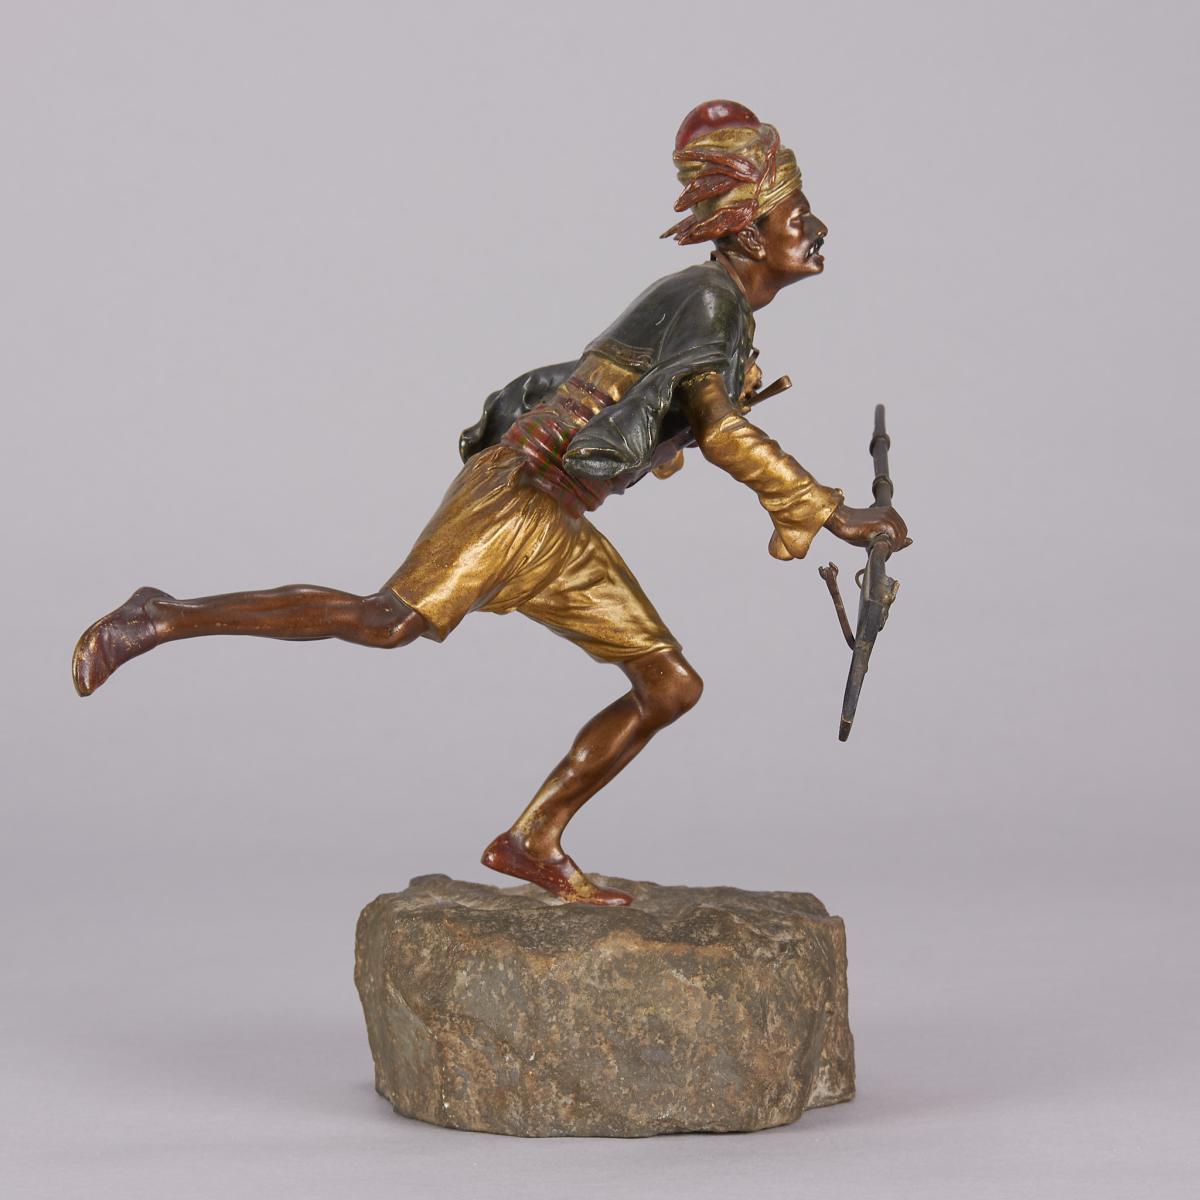 Early 20th Century Cold-Painted Bronze entitled "Running Warrior" by Franz Bergman